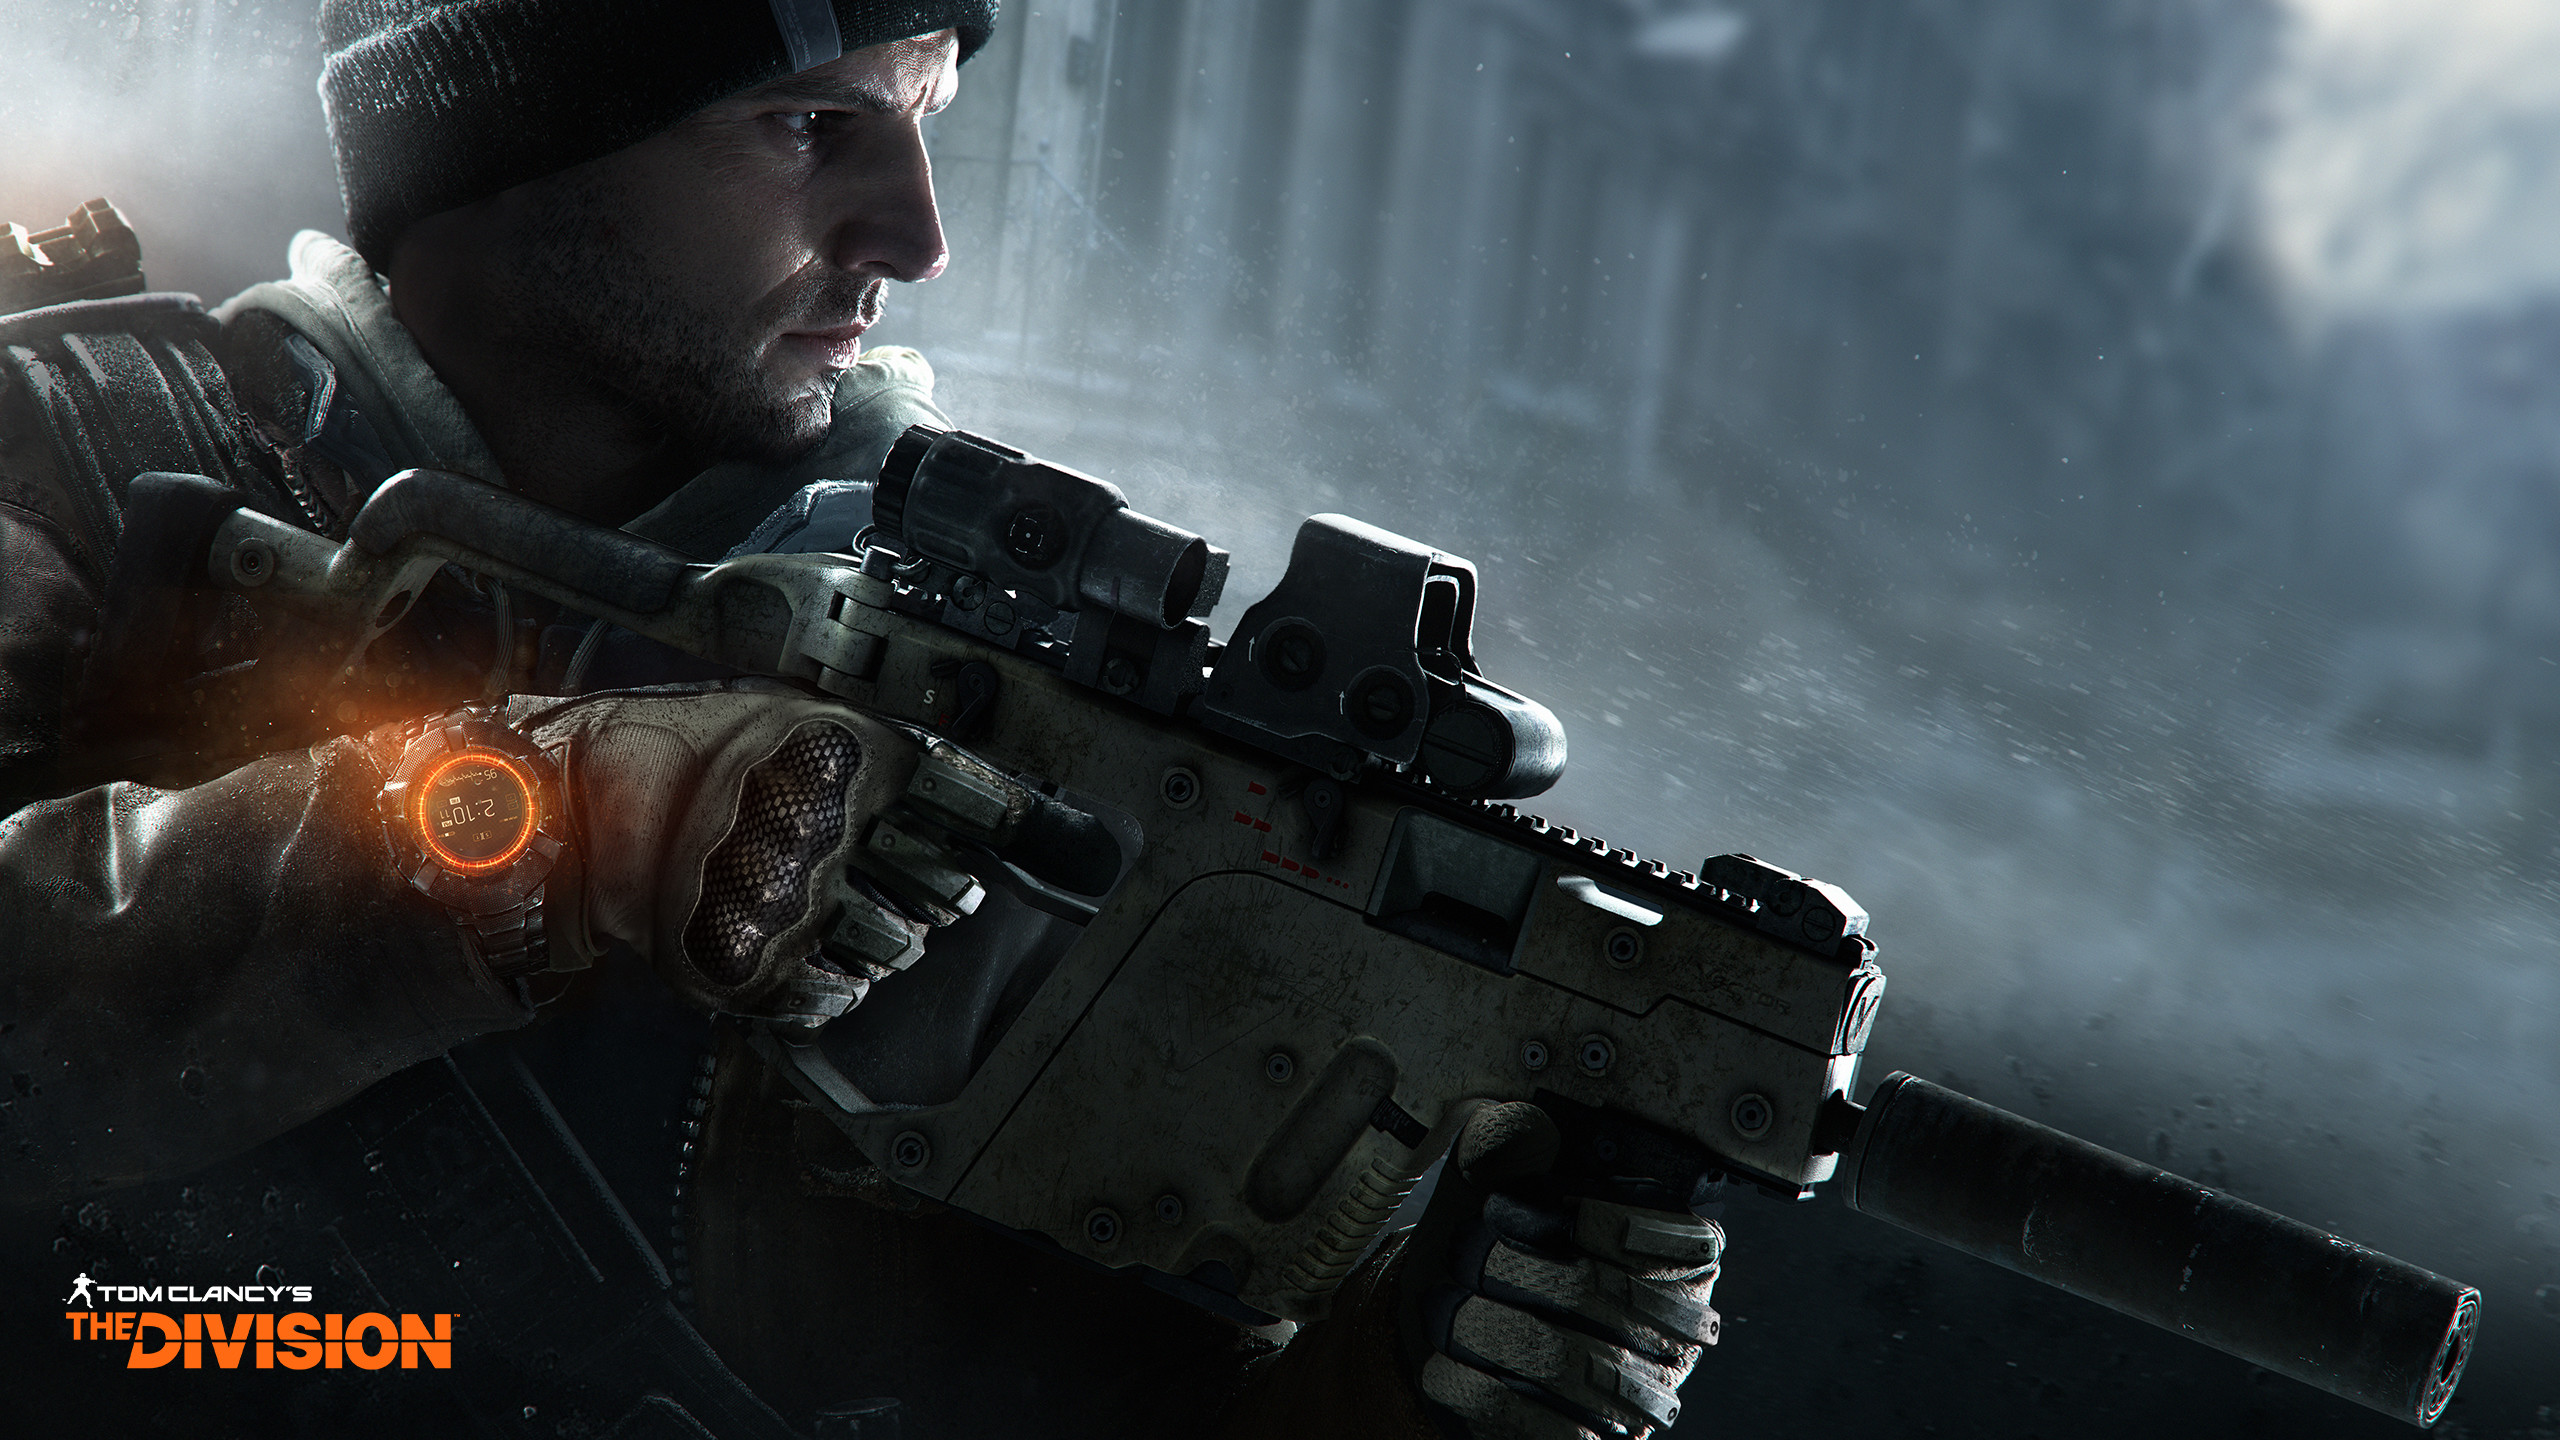 The Division Facebook Page Has Reached 1,000,000 Likes